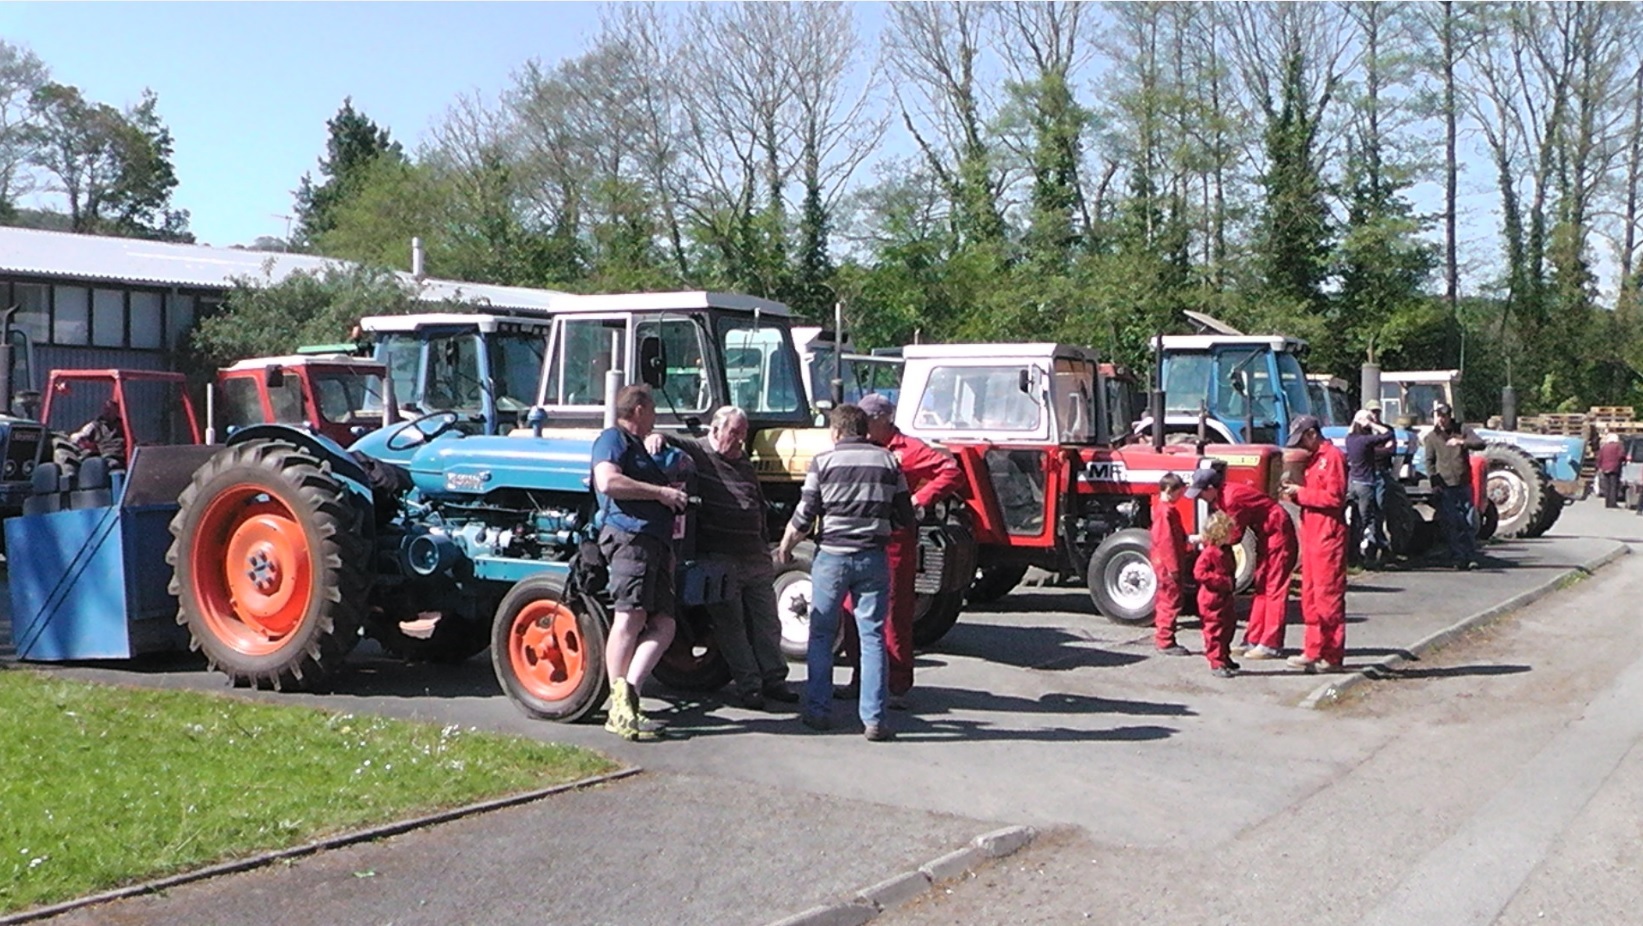 Over £1,100 raised during Vintage Tractor Rally